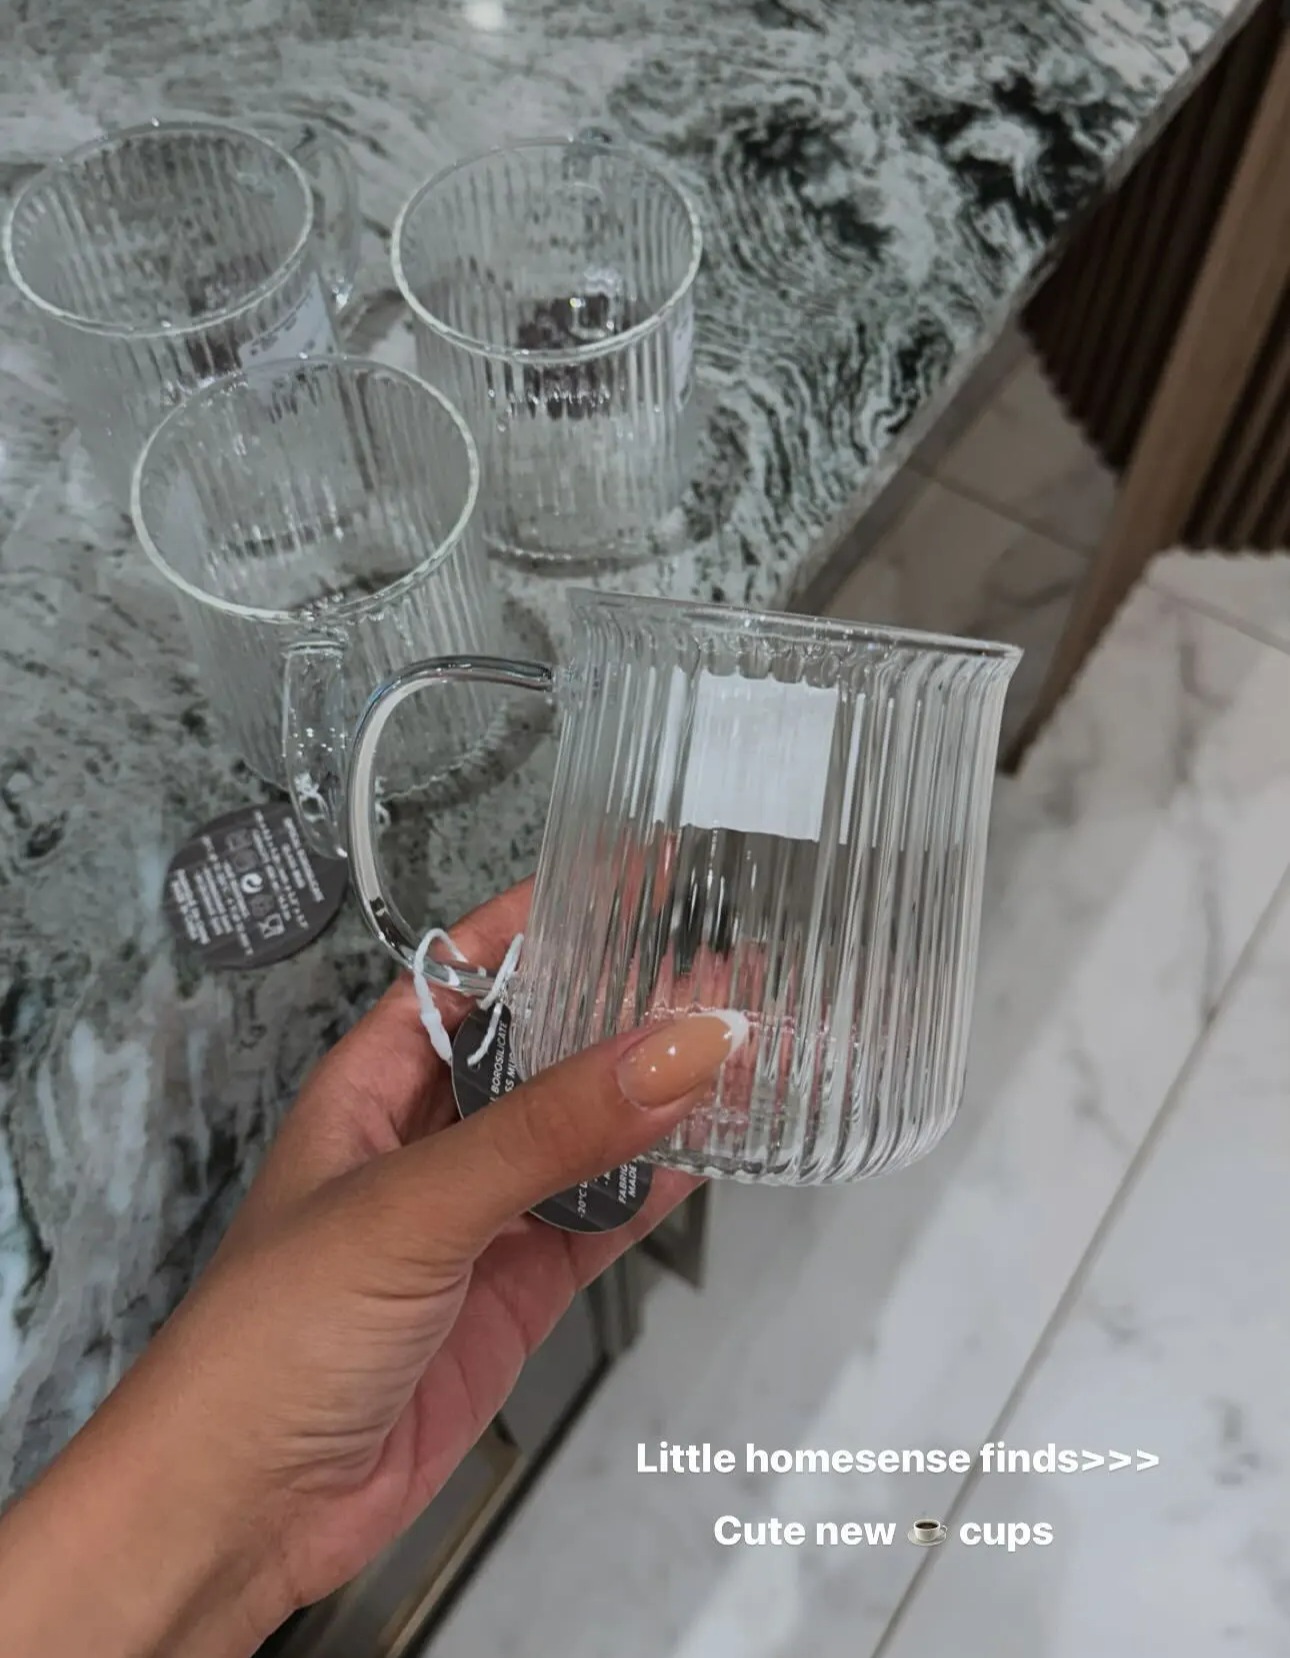 She recently promoted these ribbed glass mugs from the off-price retailer